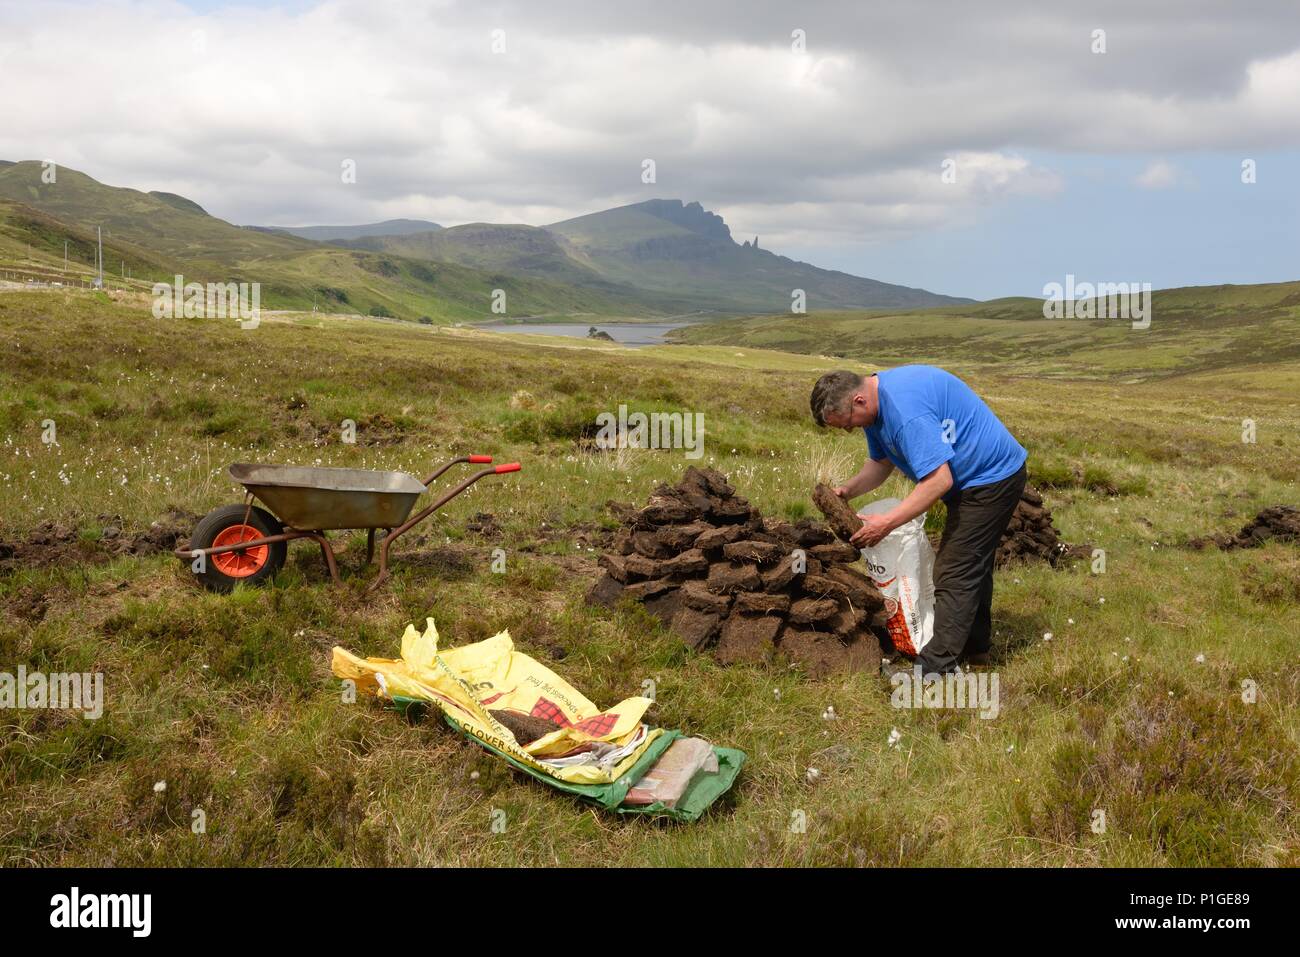 A man bags up sun dried blocks of peat on the Trotternish peninsula of the Isle of Skye in Scotland. 'The Storr' rocky hill provides the backdrop. Stock Photo